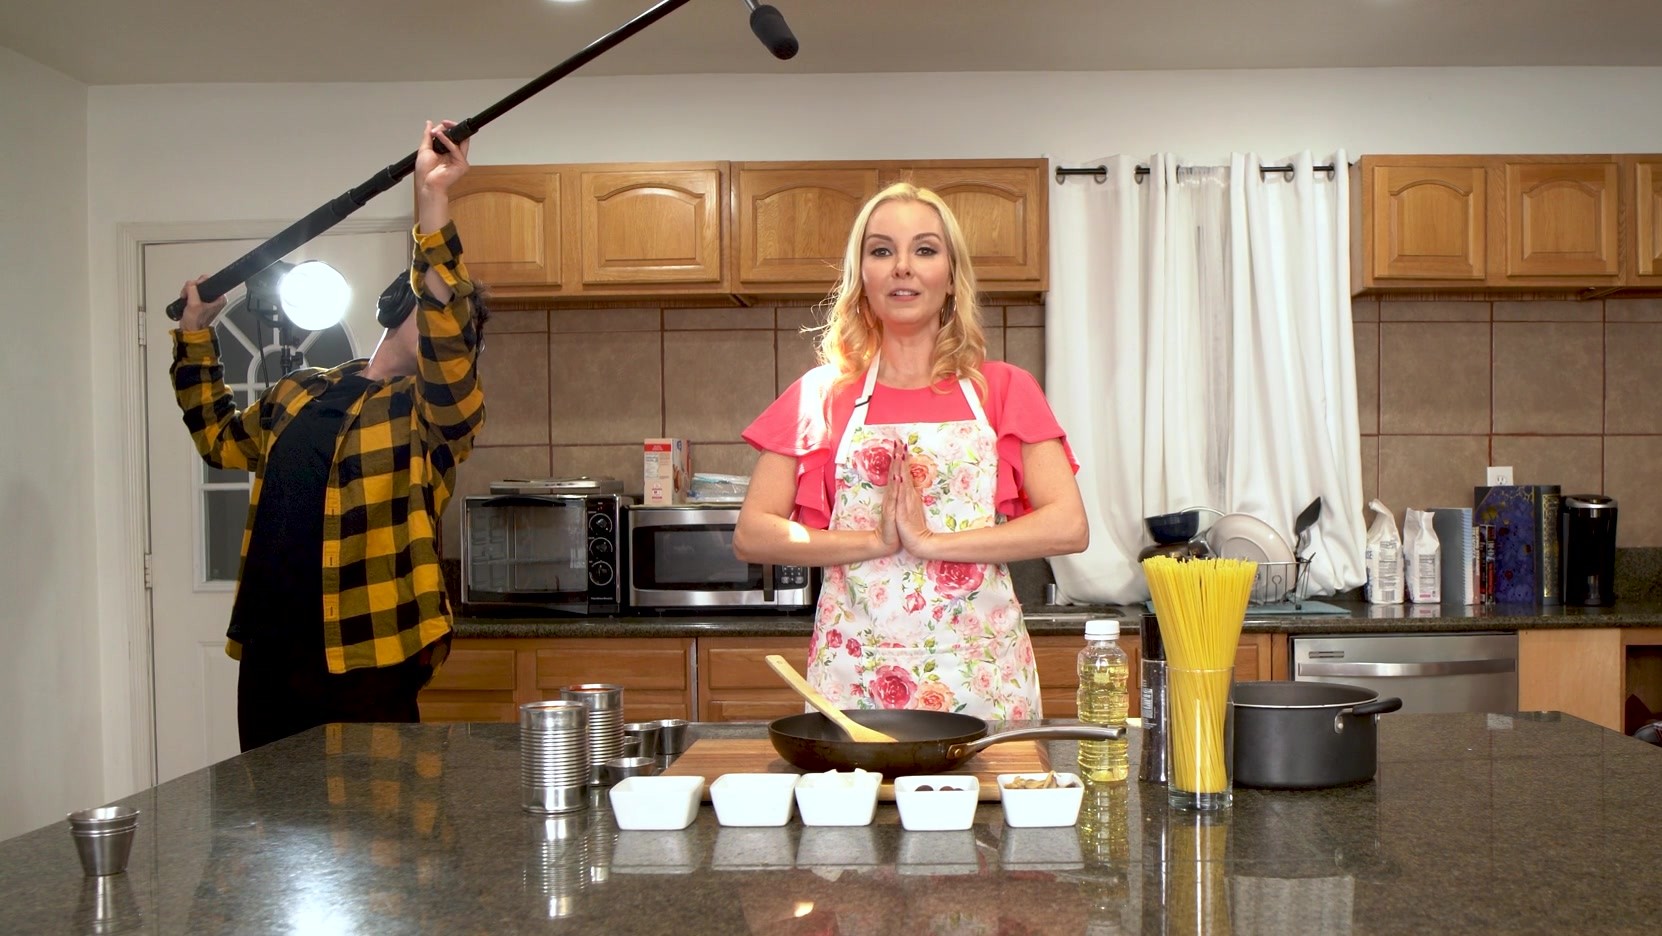 Cooking show turns pretty intimate for this curvy MILF